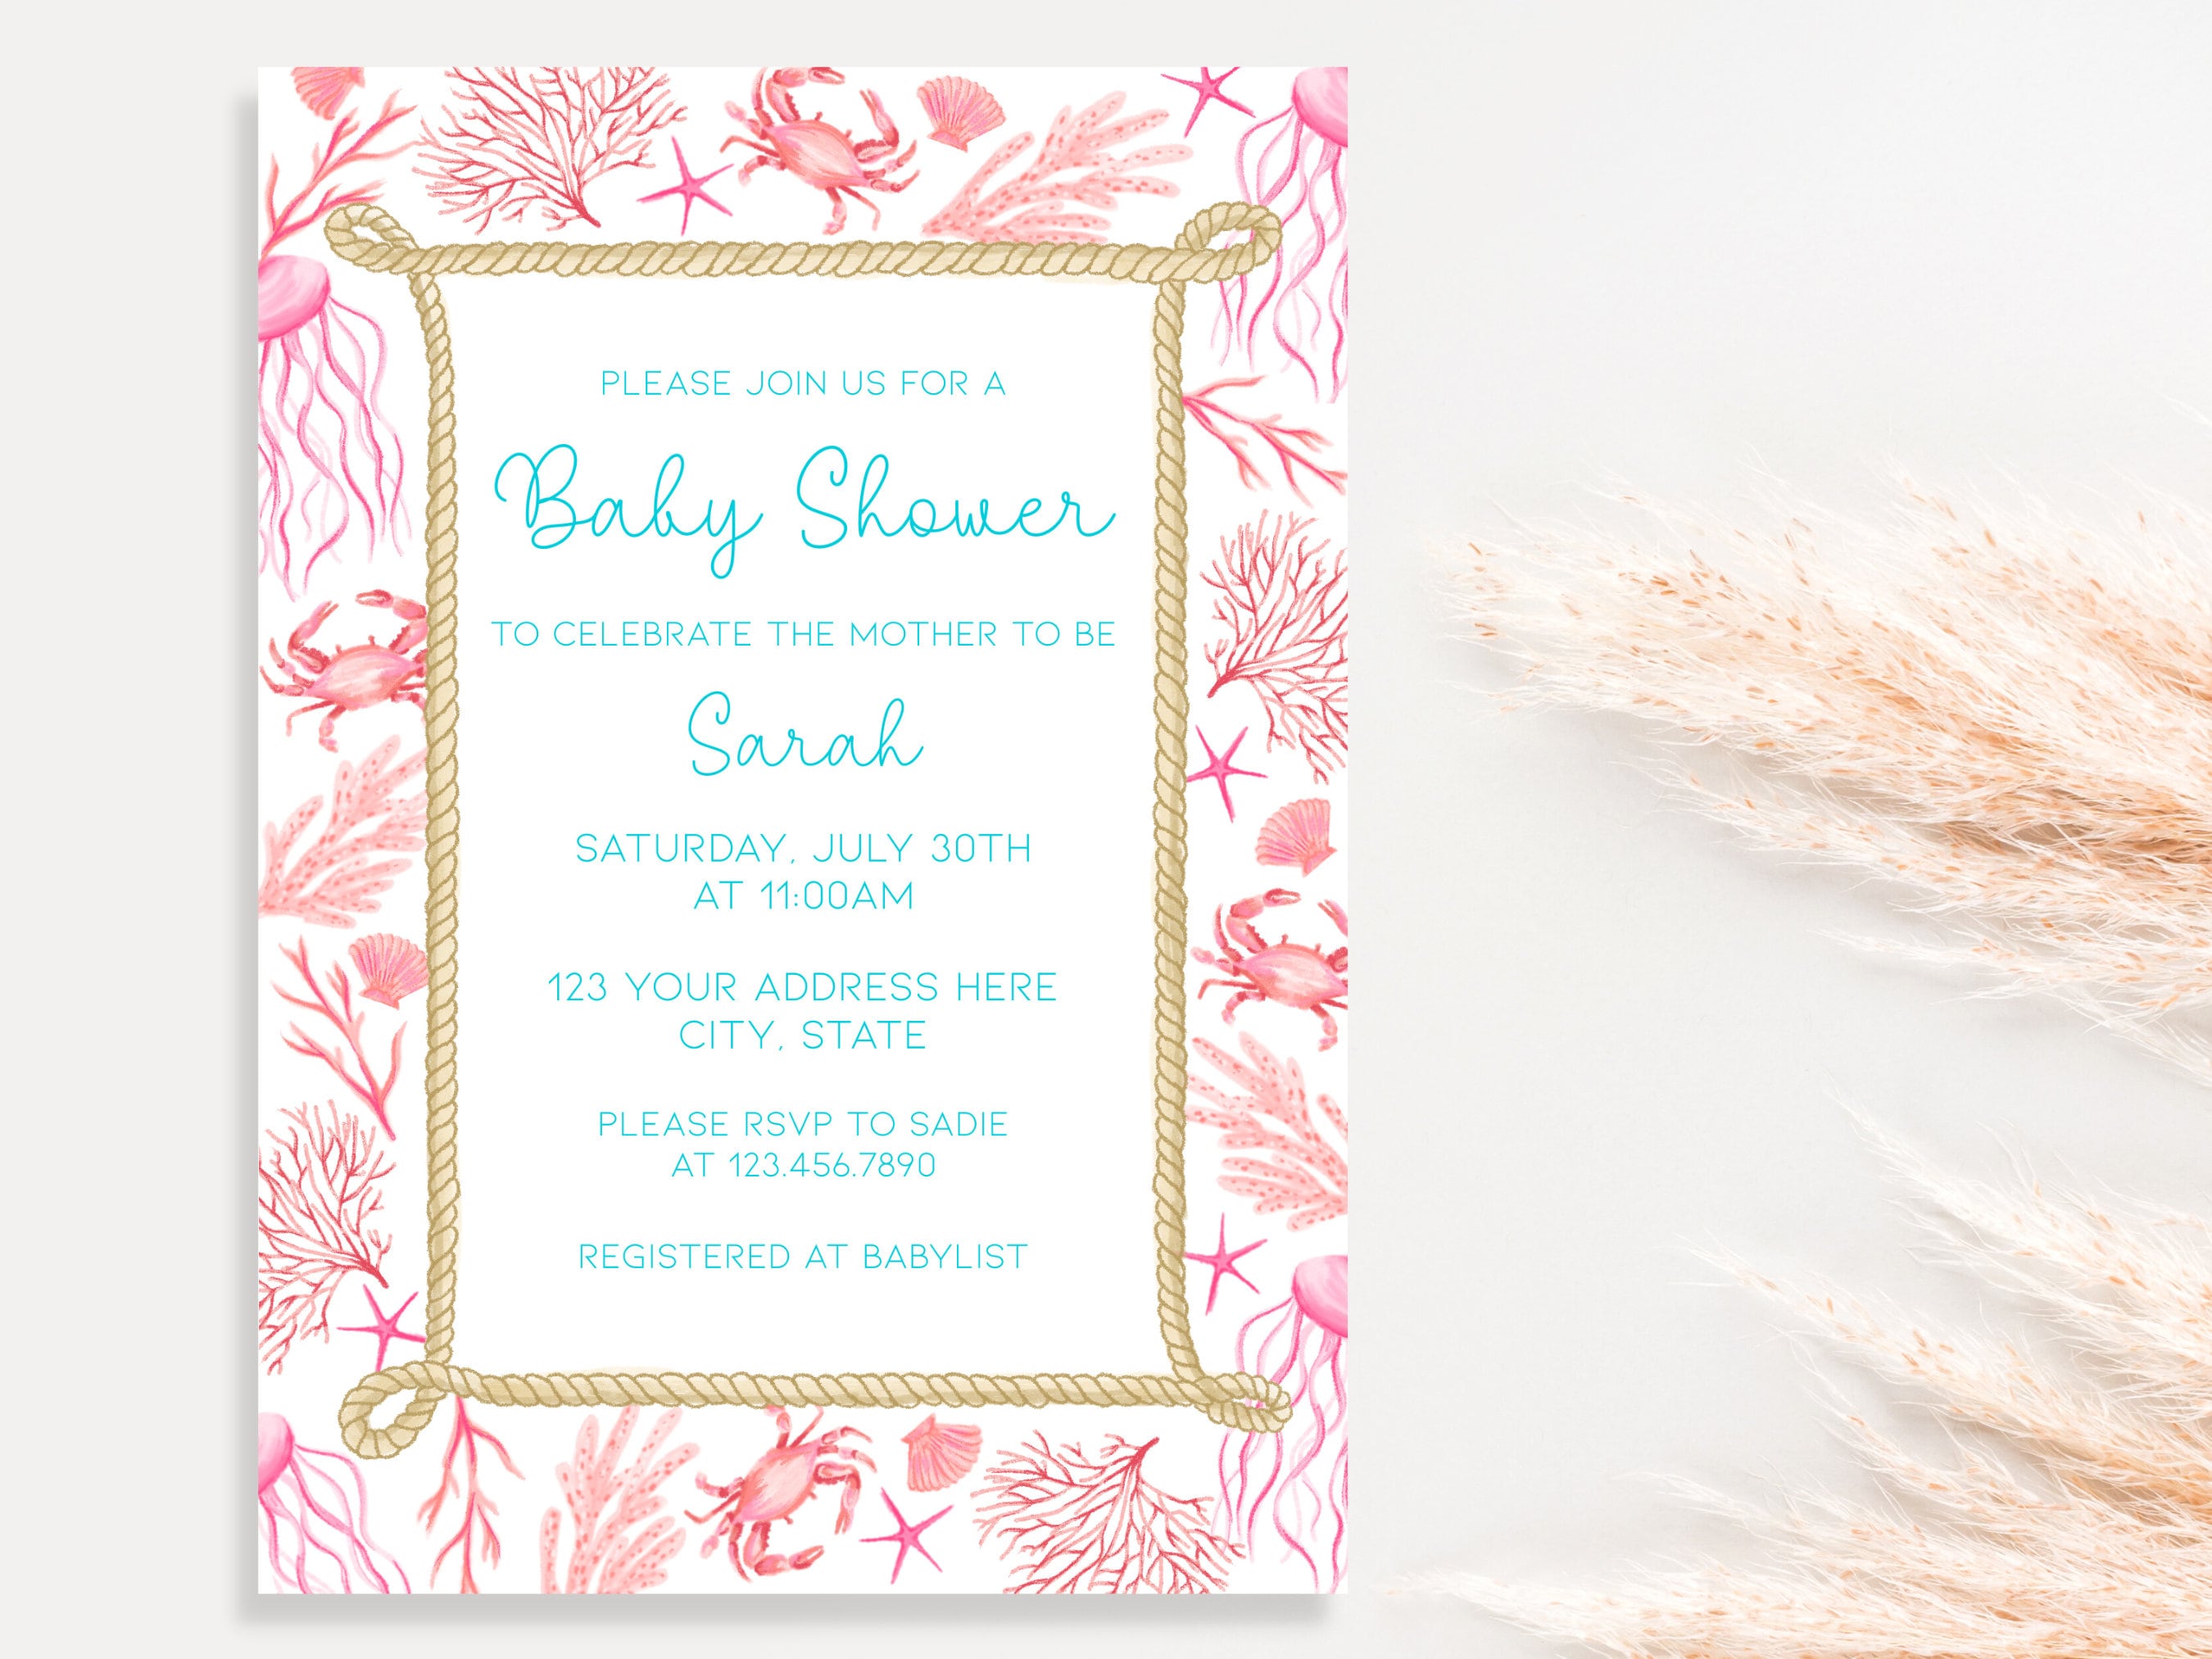 Coastal Baby Shower Invitation - EDITABLE Template. Pink Seashells & Coral  For A Baby Girl, Customize For Your Nautical Beach Theme